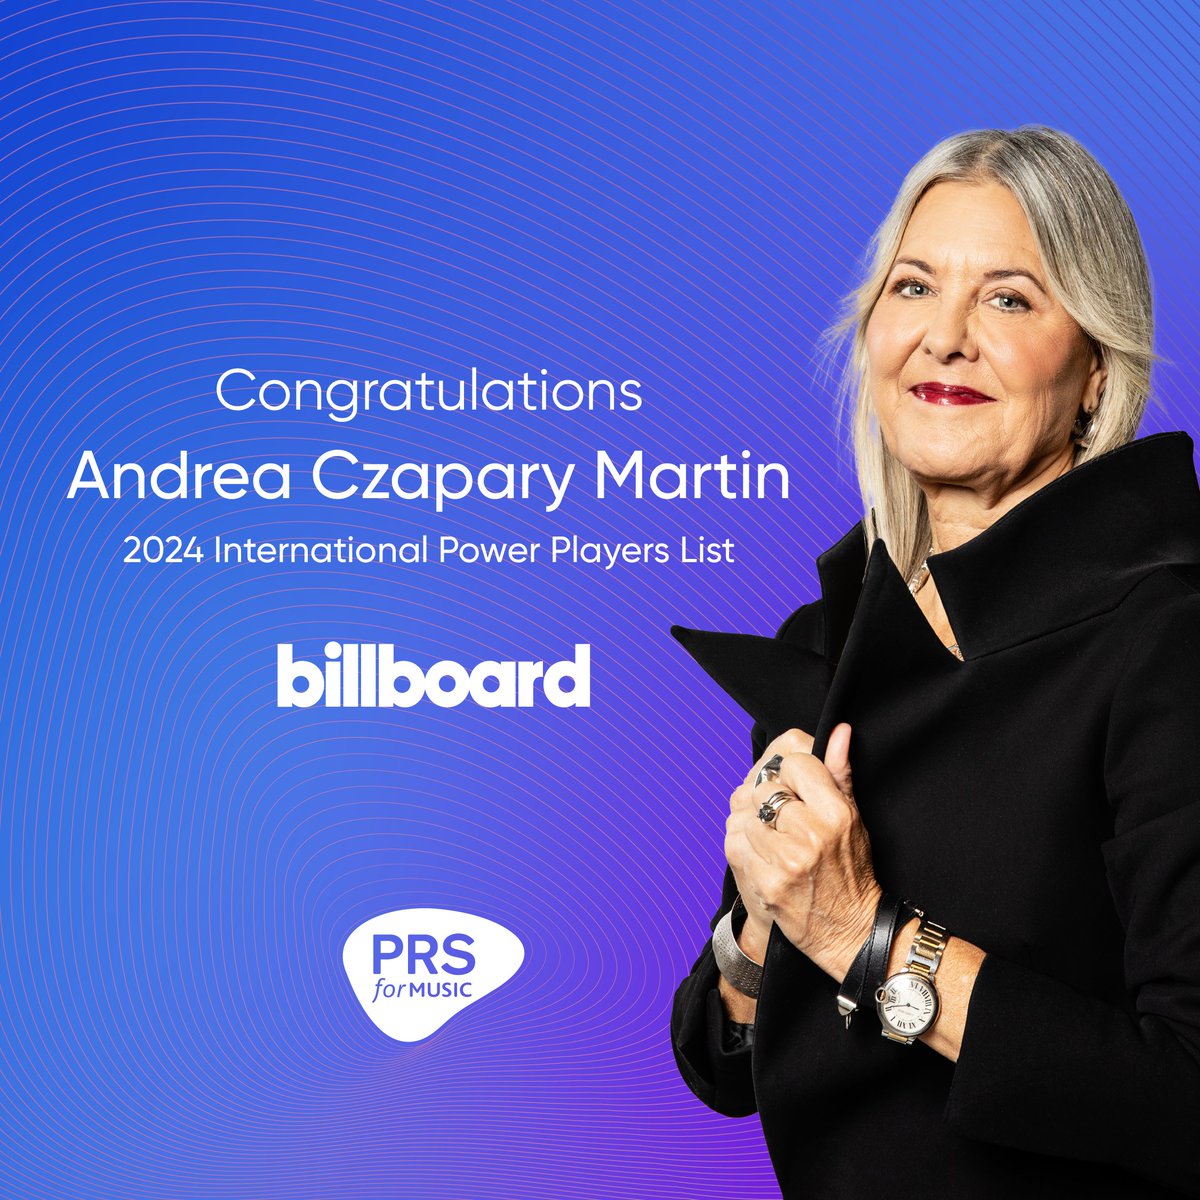 Congratulations to our CEO @andreacmartin2 - named on this year's @billboard International Power Players list. prsformusic.com/m-magazine/new…